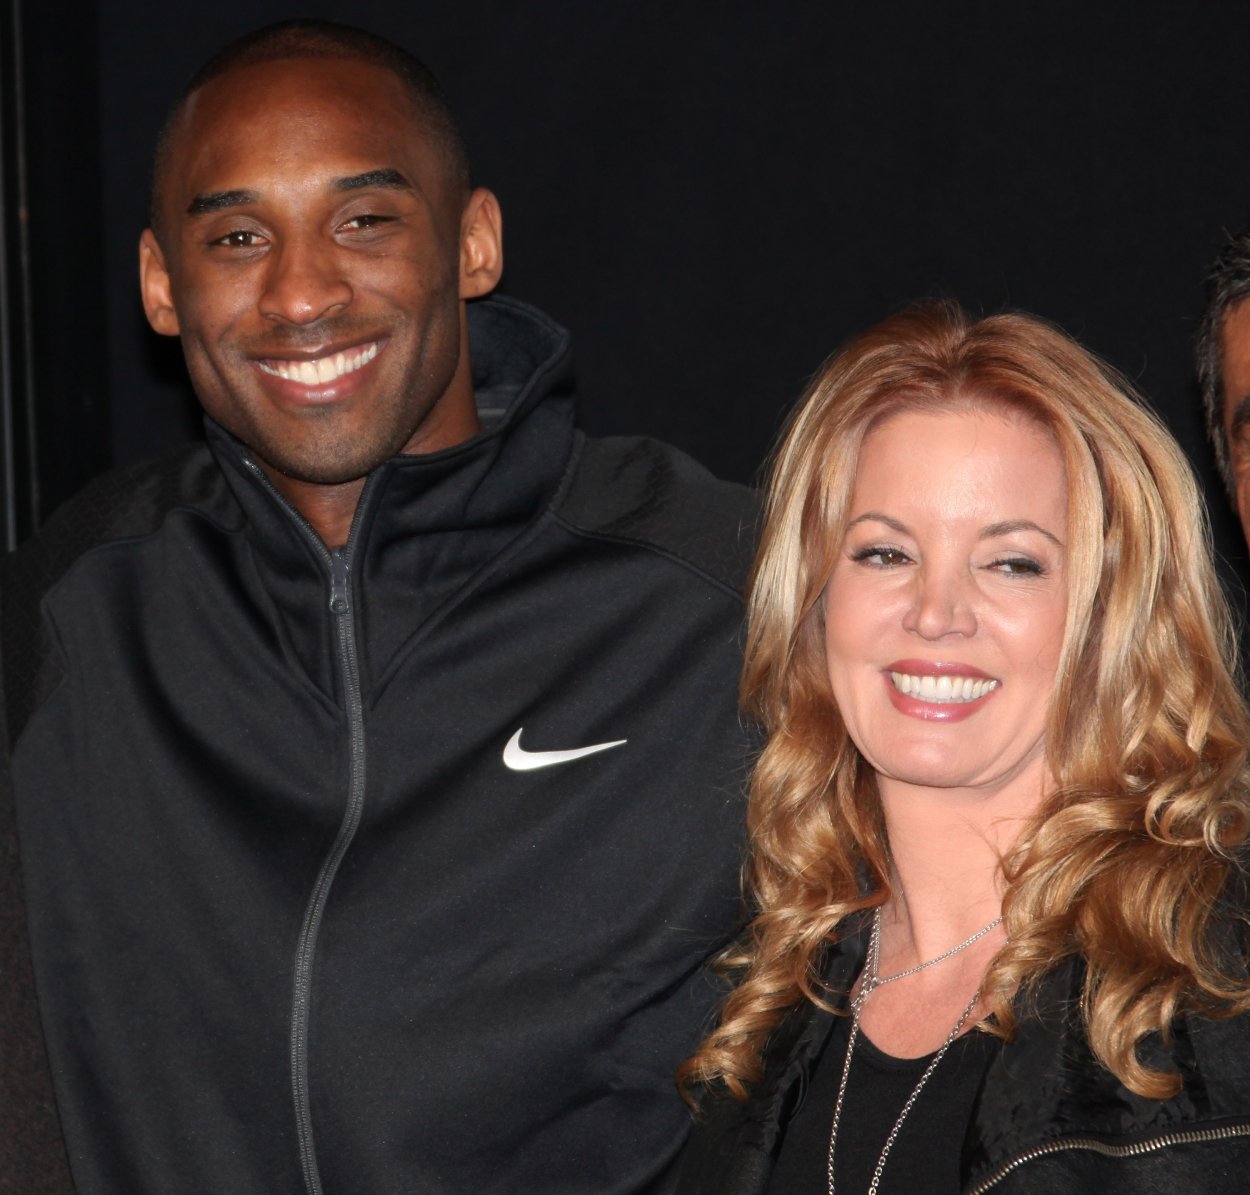 Los Angeles Lakers legend Kobe Bryant (L) and Lakers owner Jeanie Buss in 2011.